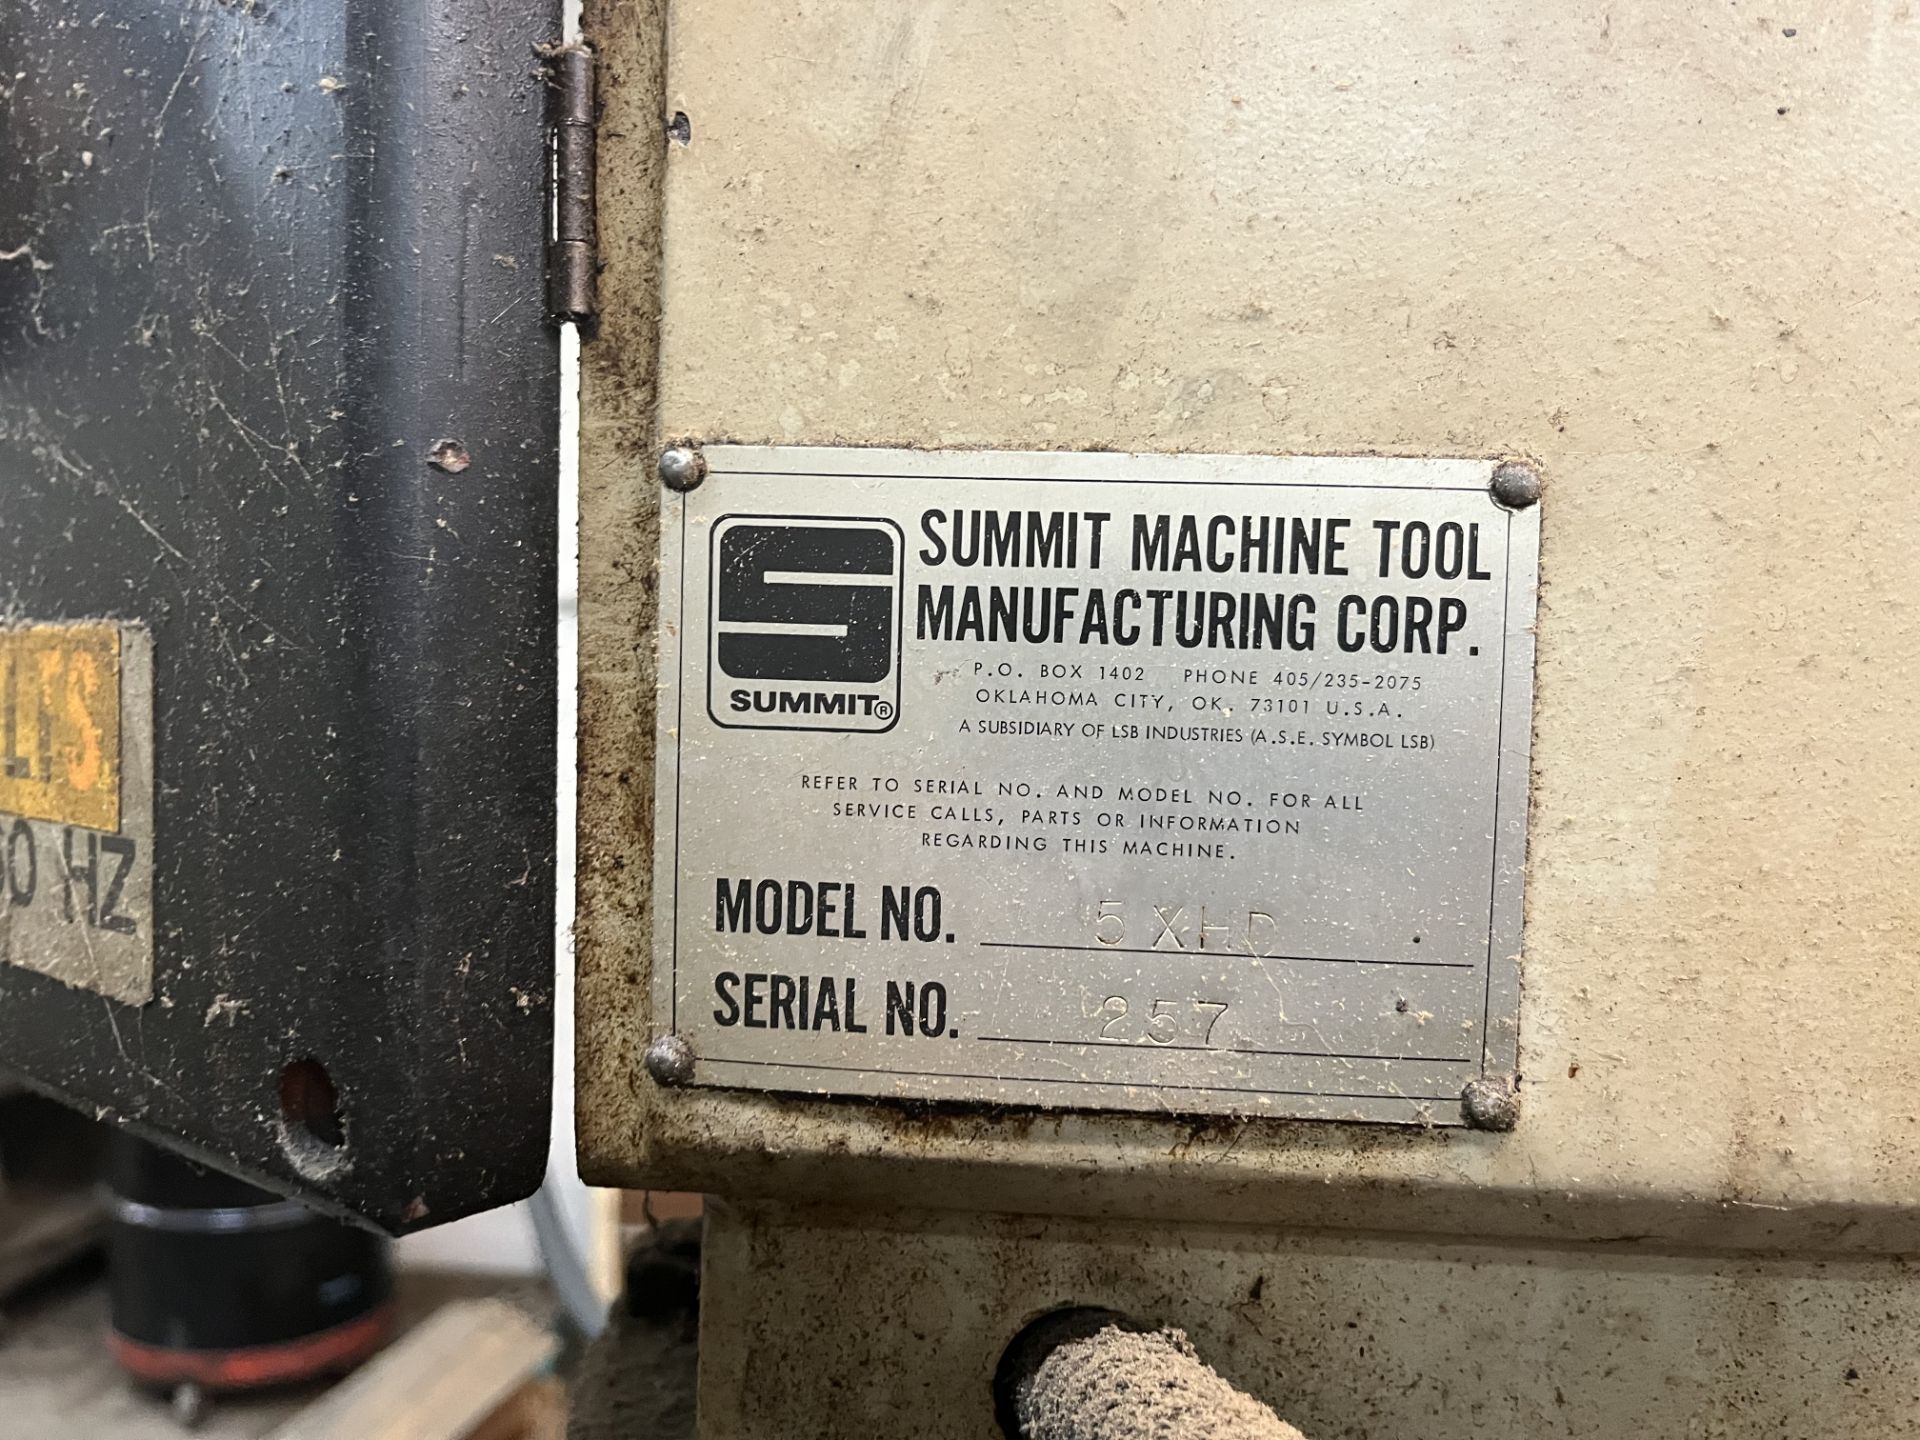 Summit Series TCA-70, Model 5XHD Vertical Drill Press/Tapping Machine, with Auto Feed, S/N 257 - Image 4 of 4